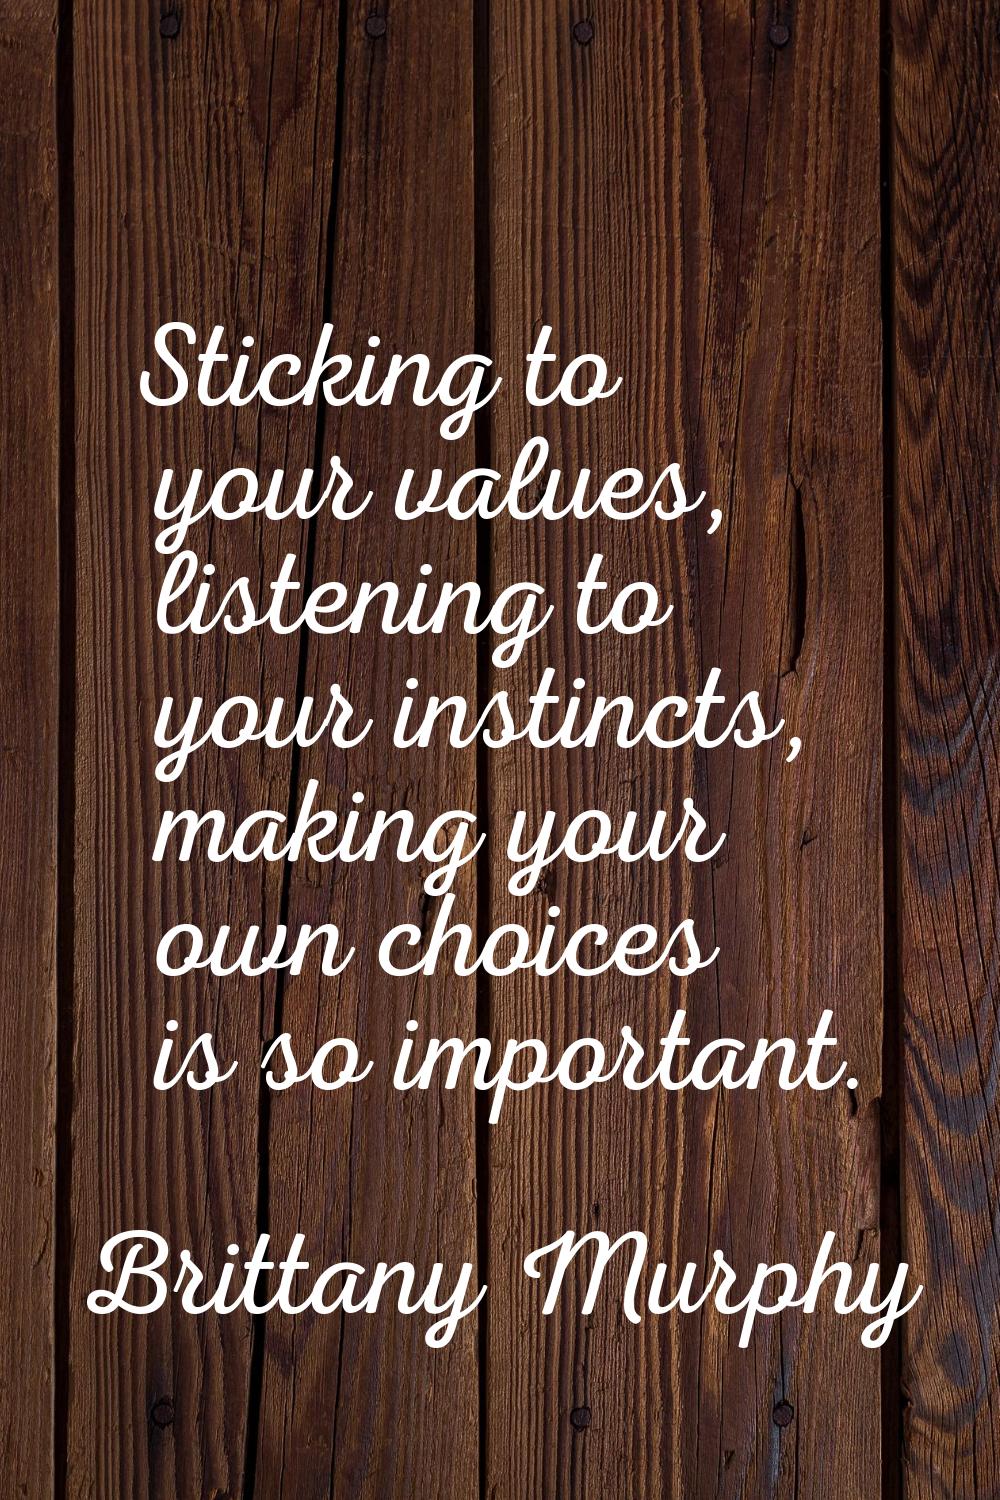 Sticking to your values, listening to your instincts, making your own choices is so important.